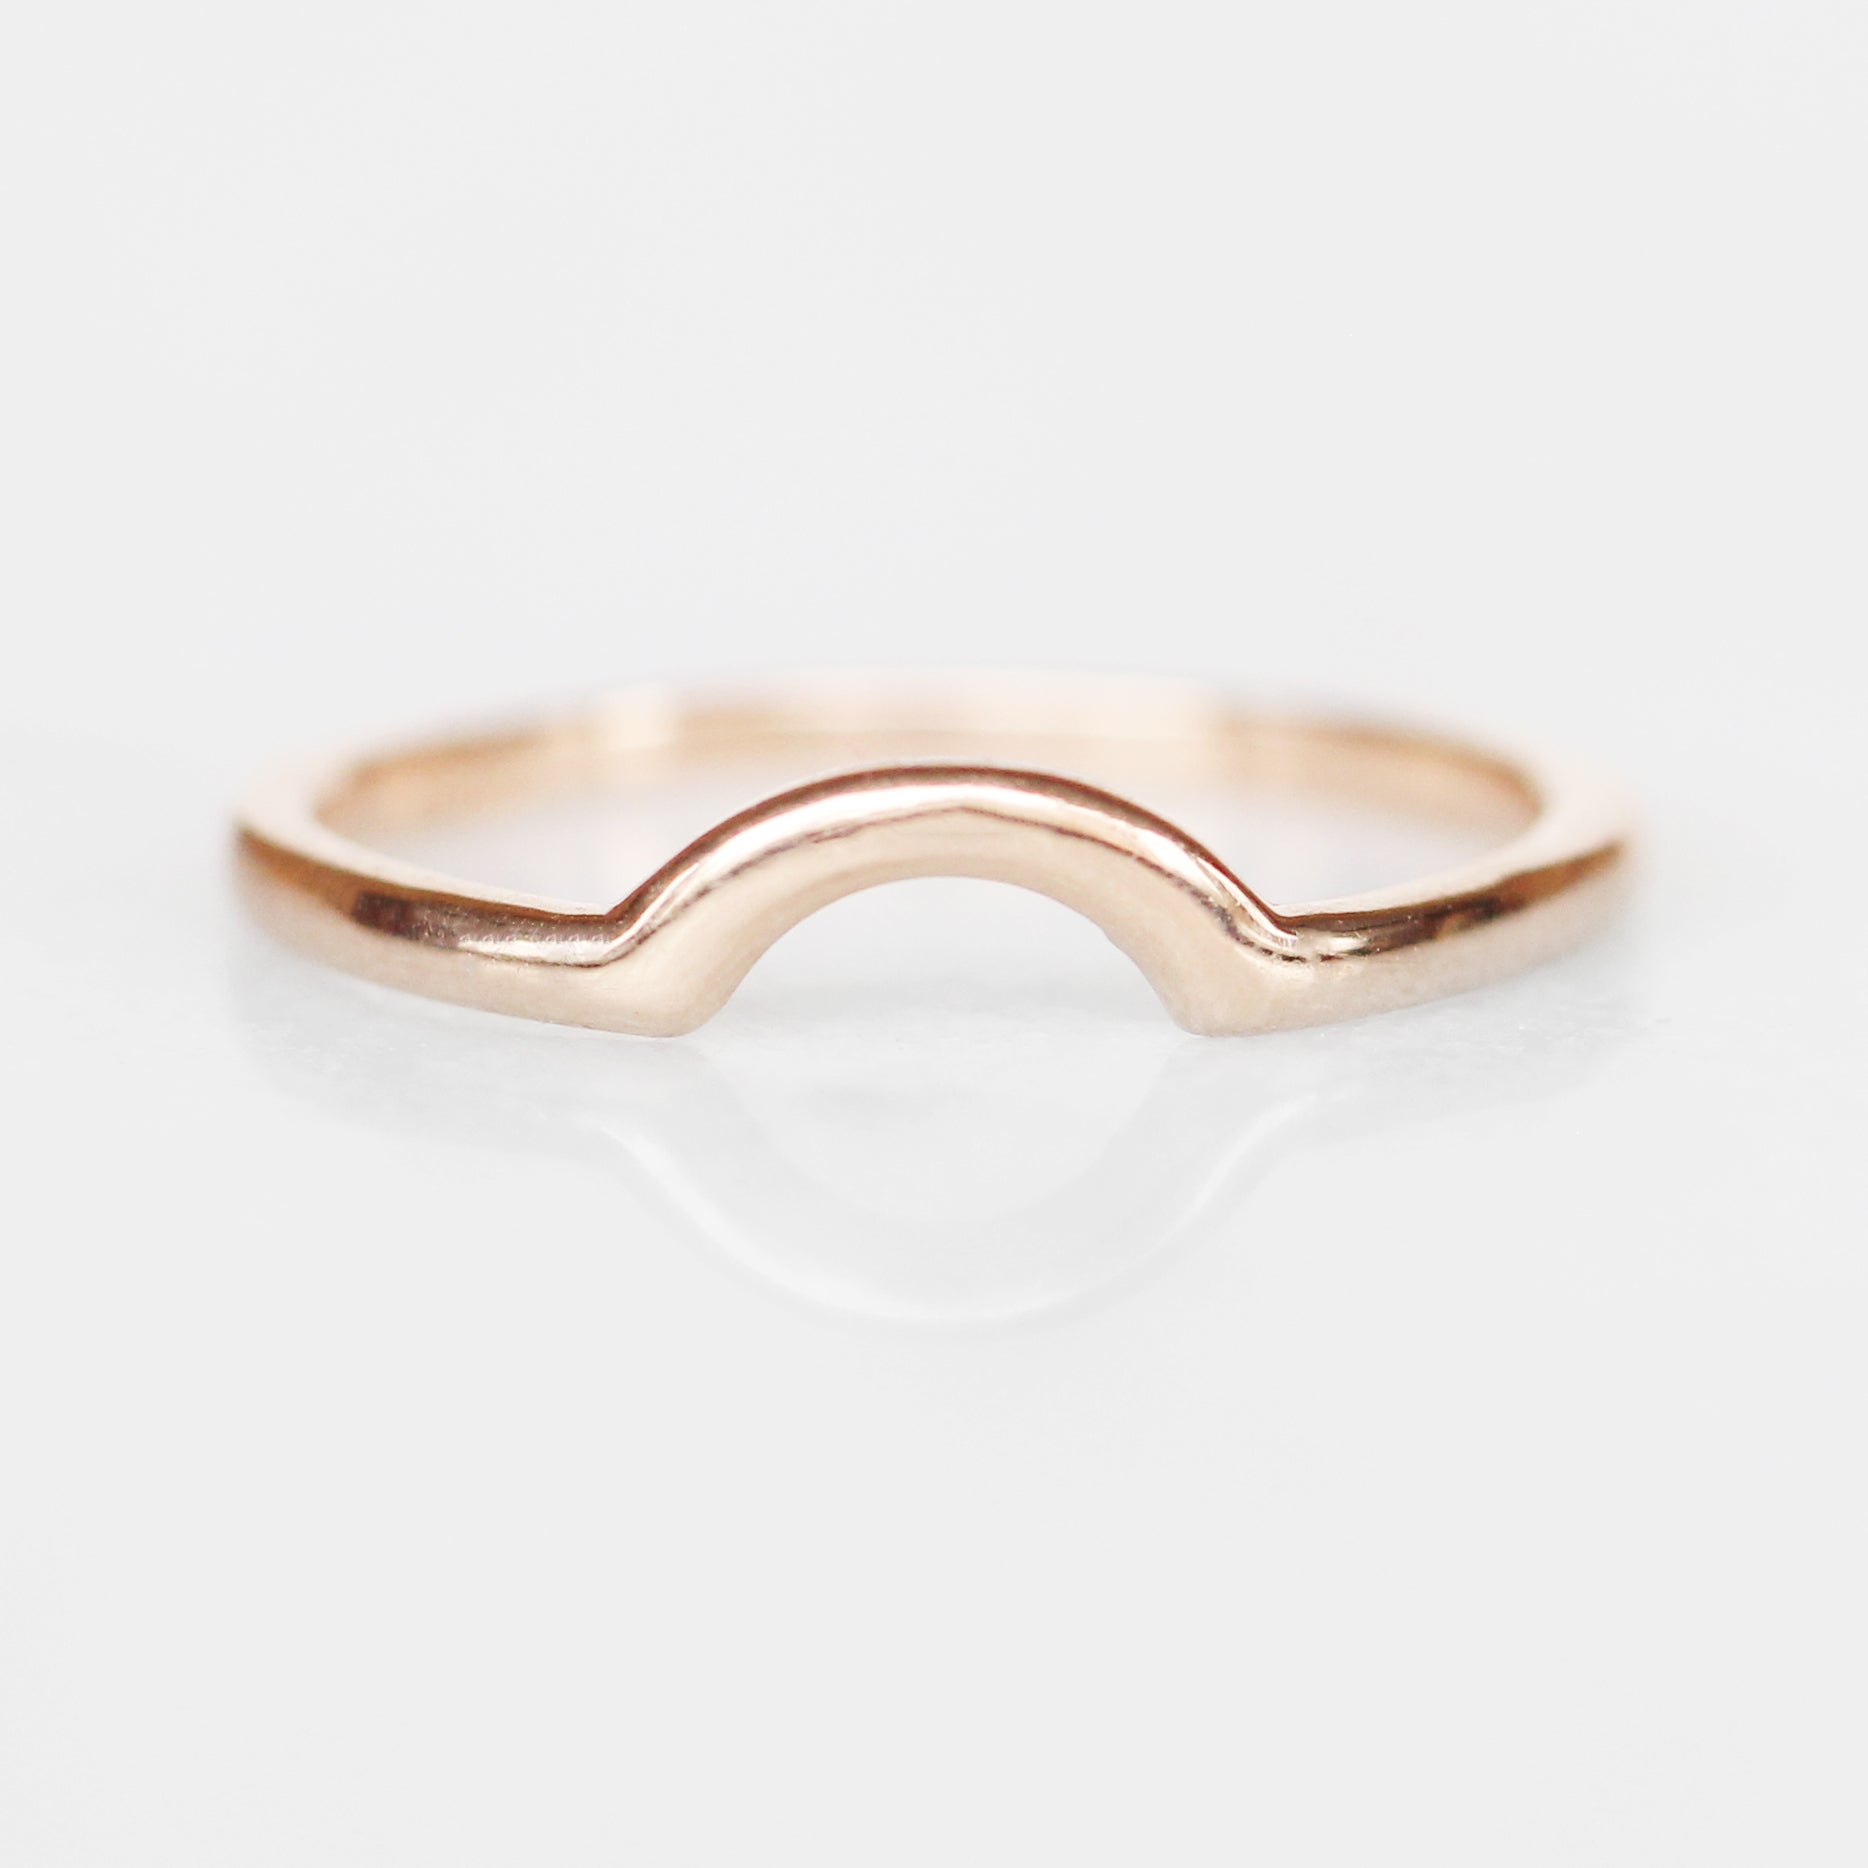 Archer wedding band - customized contour band - 14k gold of choice - Midwinter Co. Alternative Bridal Rings and Modern Fine Jewelry